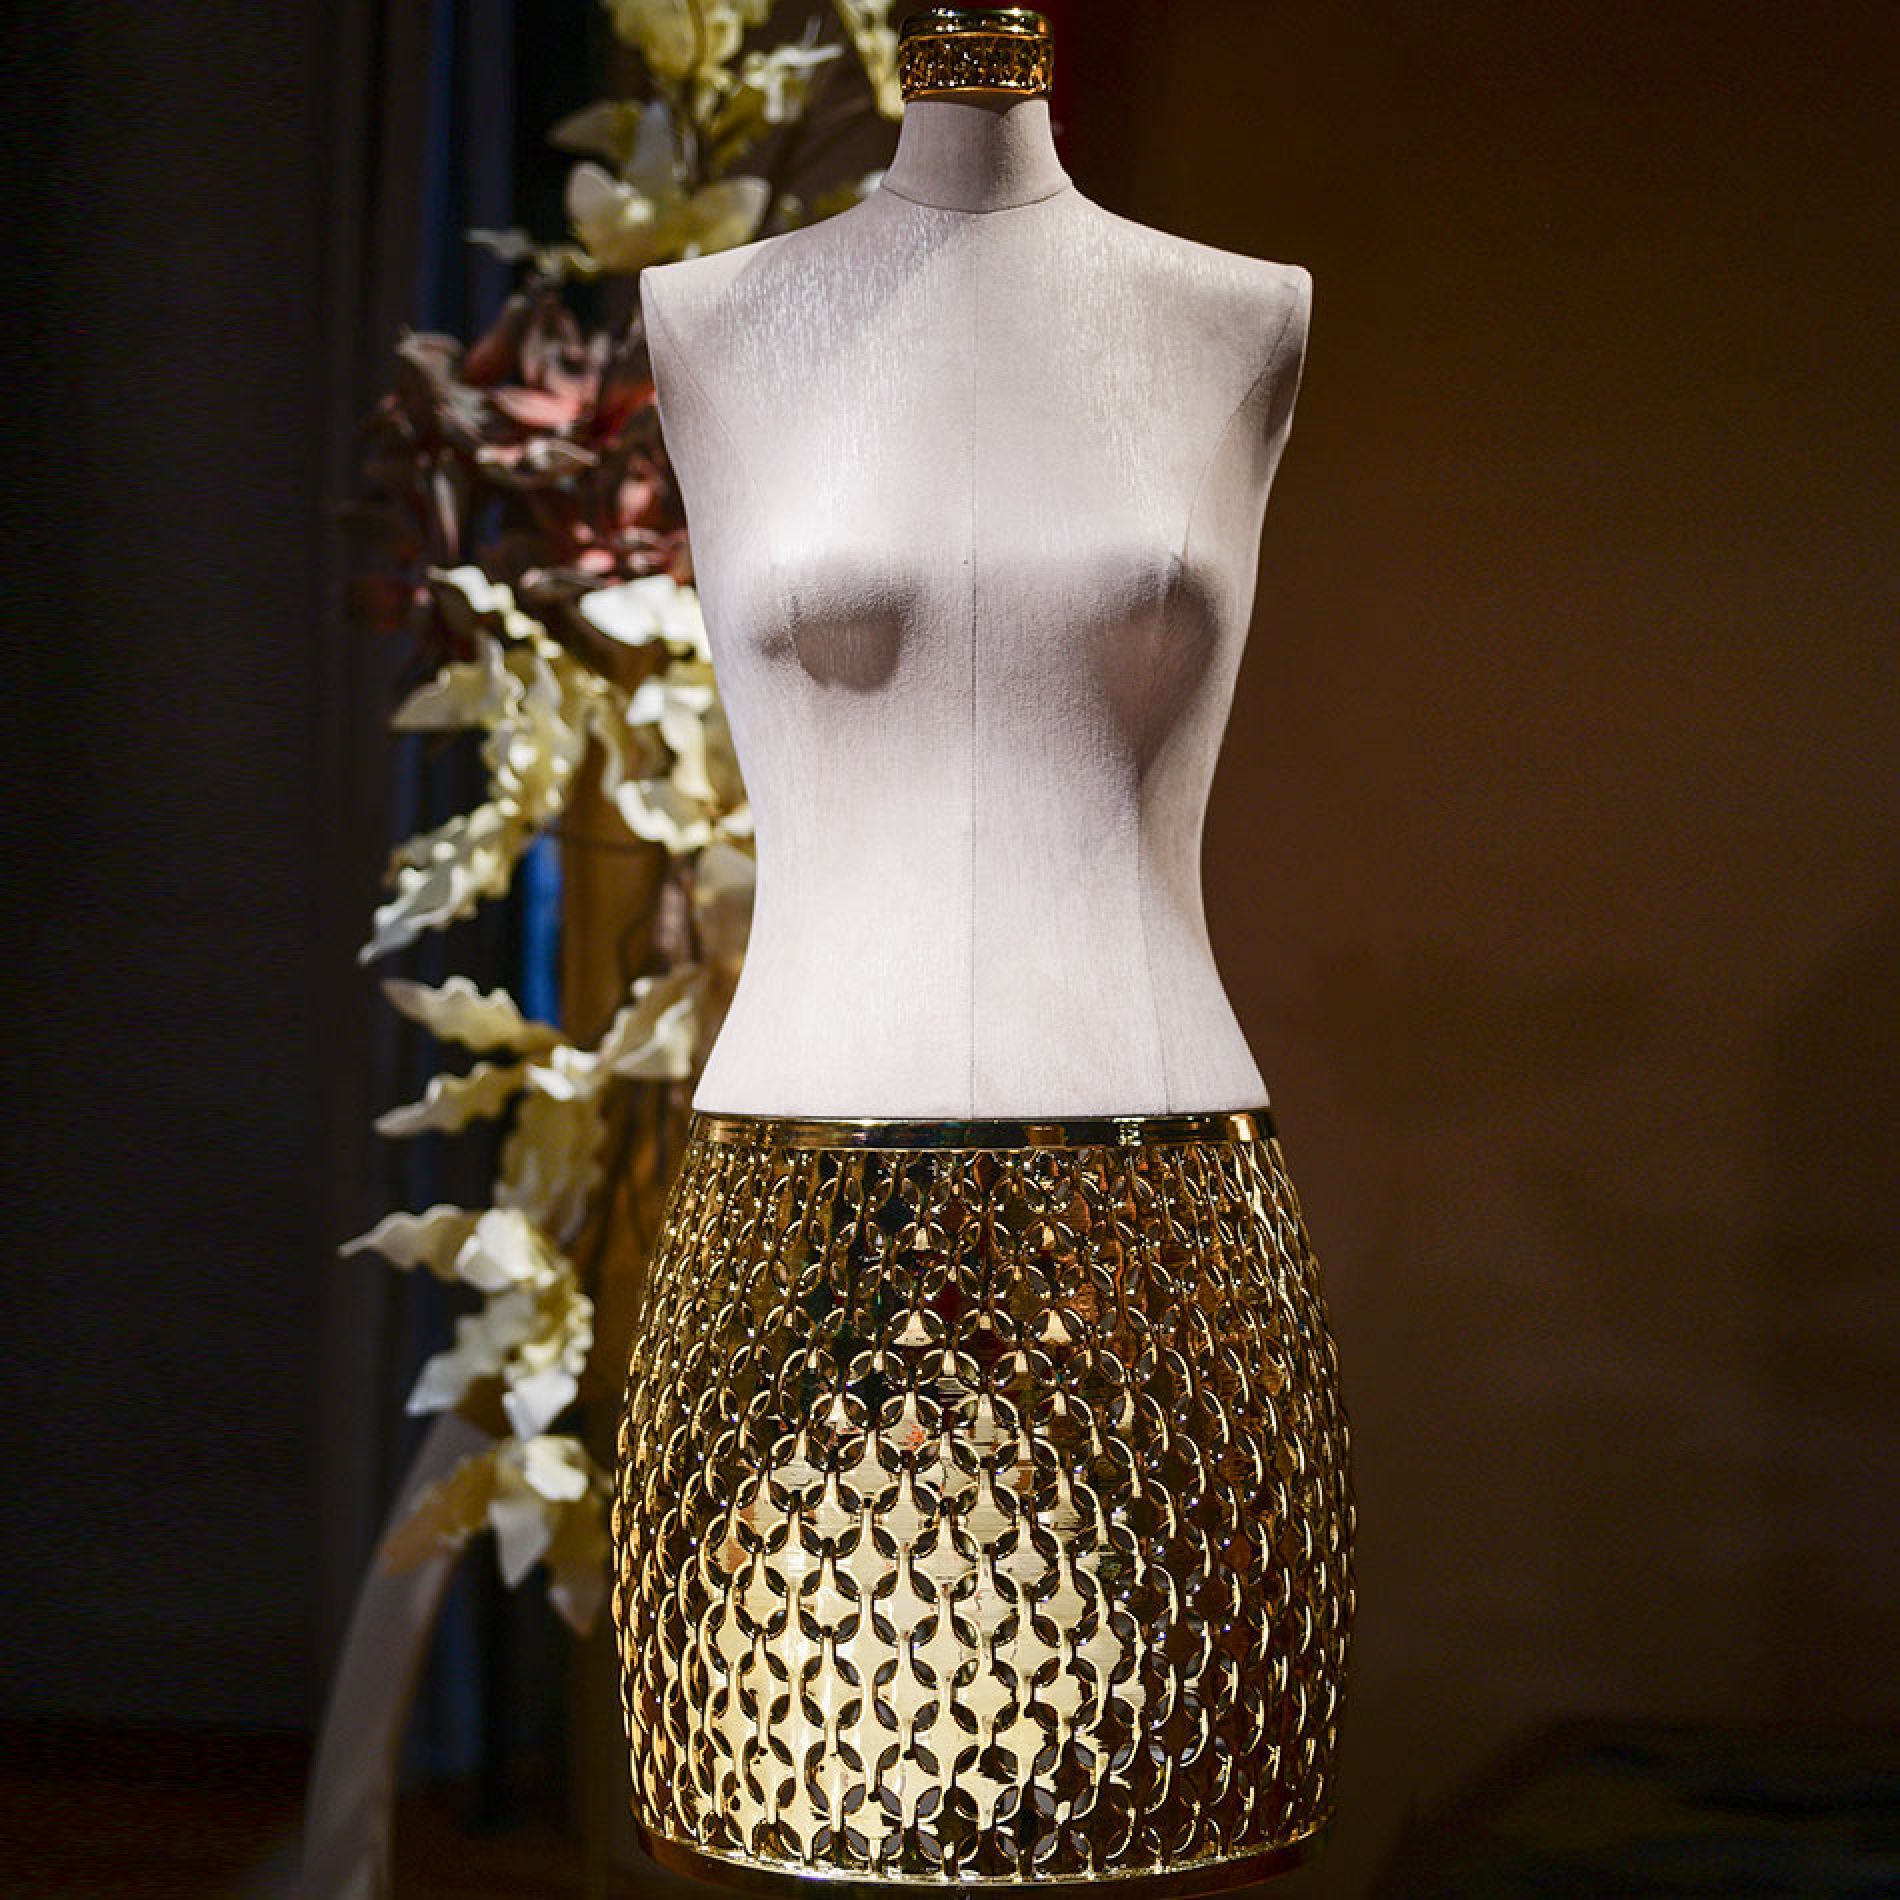 Female Mannequins Gallery Image